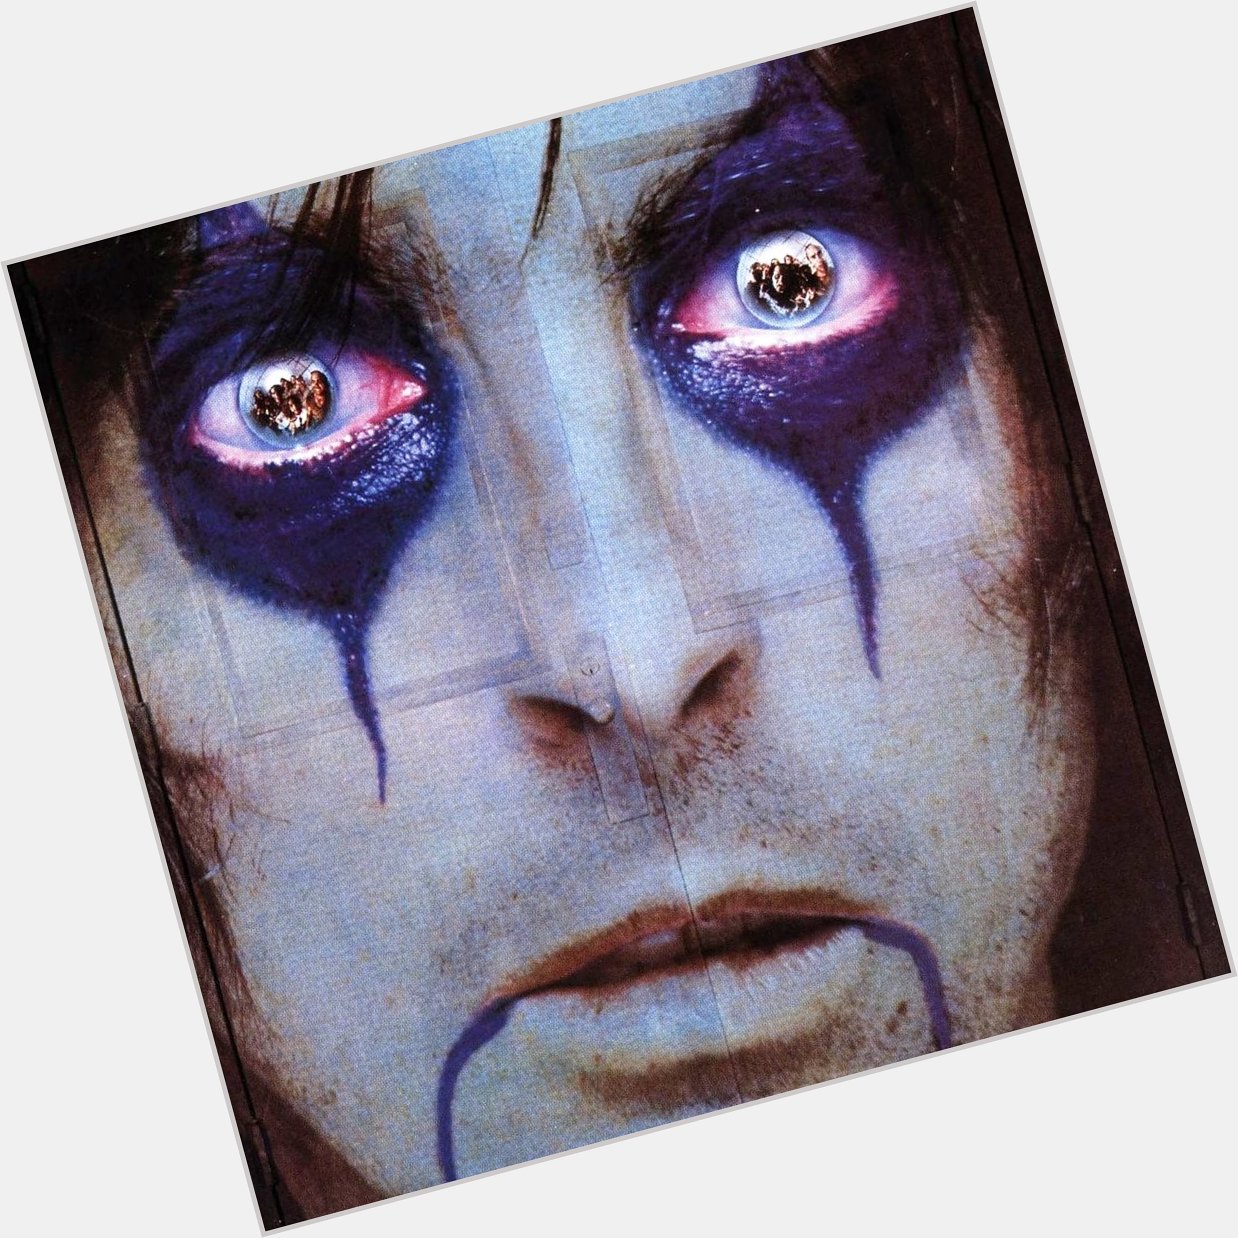 70 years old today! Happy birthday to The Godfather of Horror Rock, Alice Cooper! 